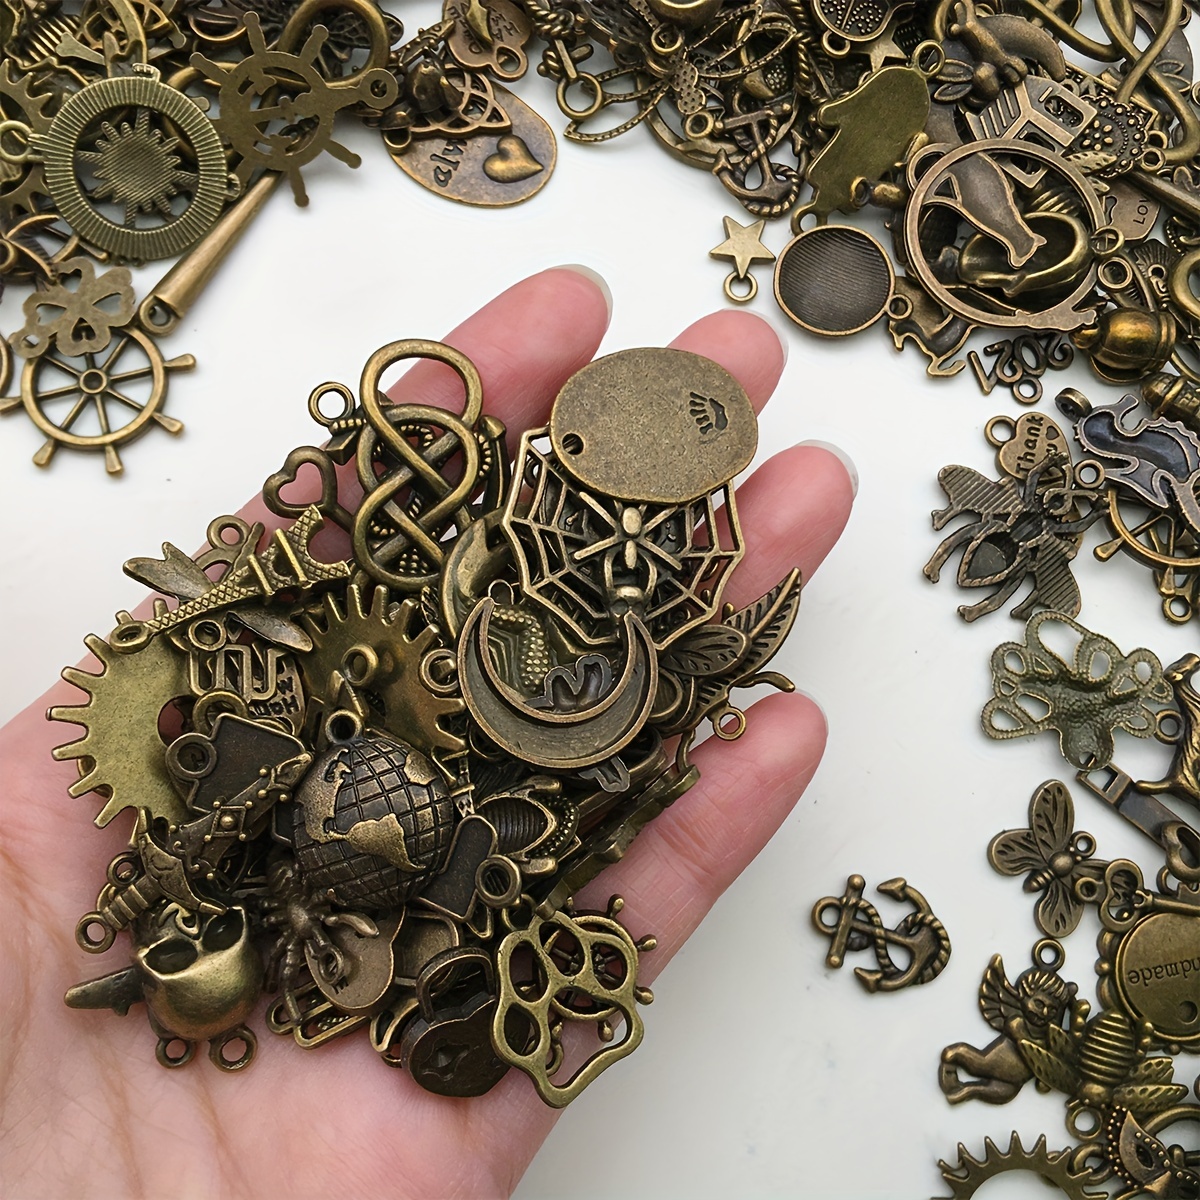 BronaGrand Vintage Charms Bulk,200pcs Mixed Antique Charms Tibetan Alloy  Pendants for Necklace Bracelet Jewelry Making and Crafting,Antique Silver 